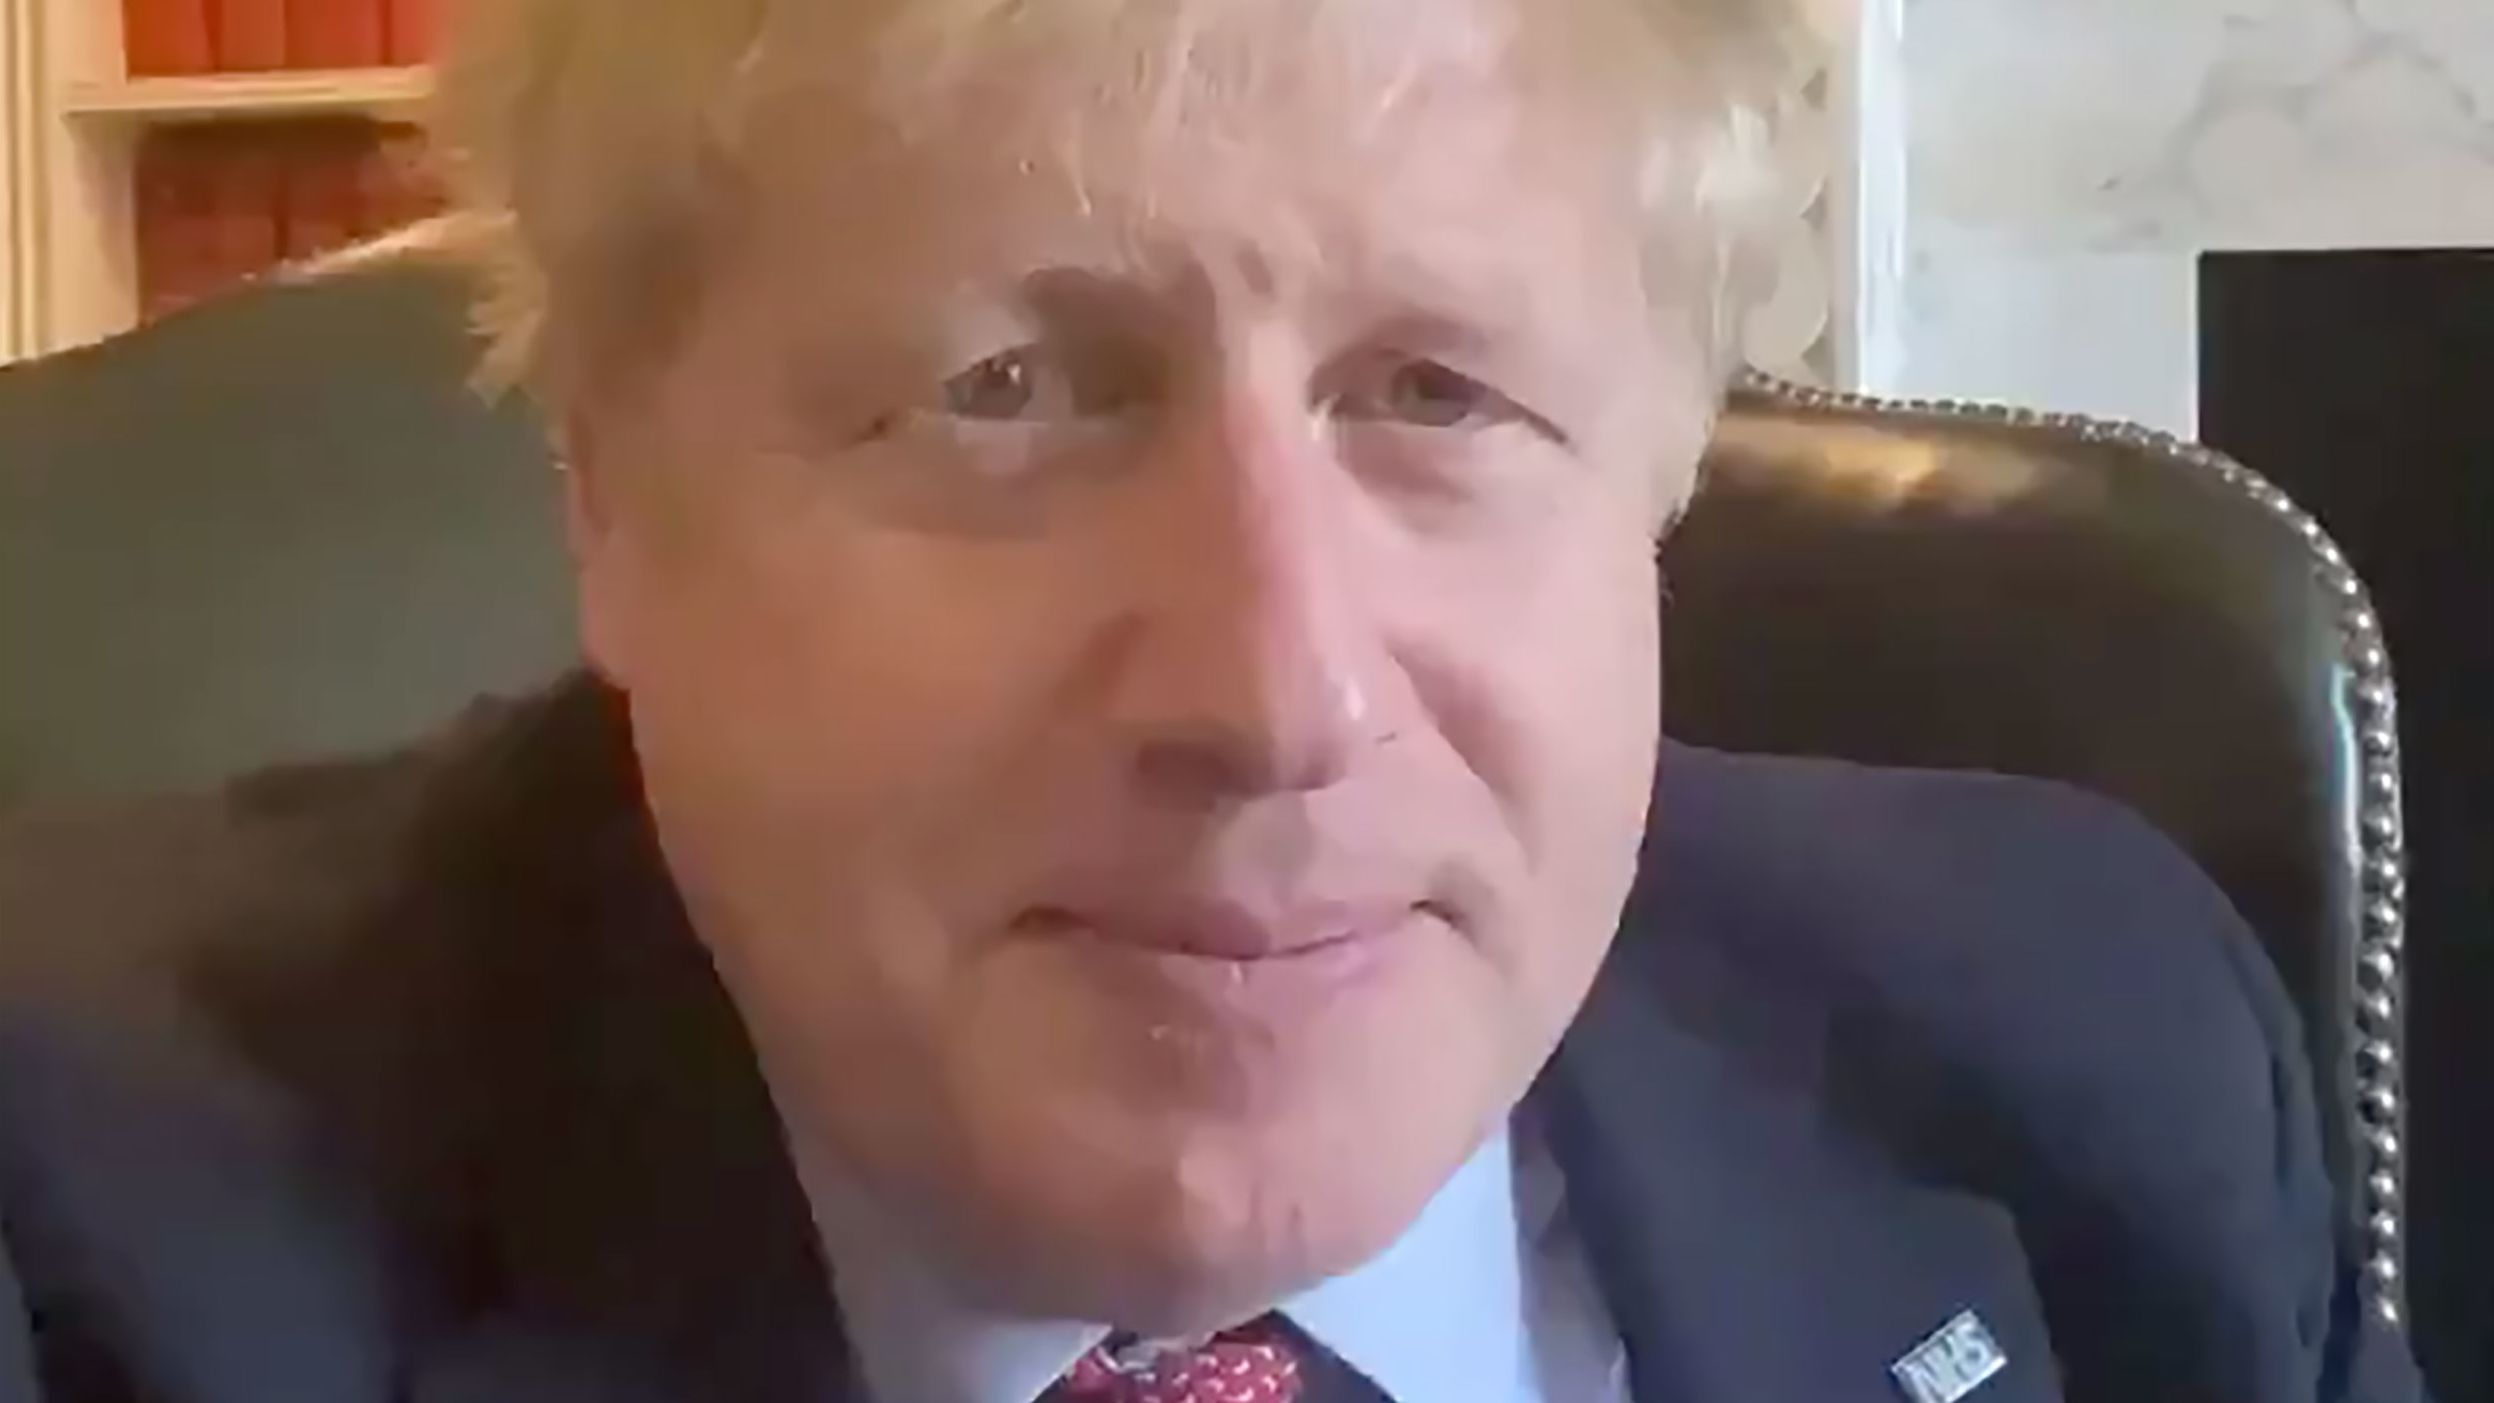 In March 2020, Johnson announced in a <a href="https://twitter.com/BorisJohnson/status/1243496858095411200" target="_blank" target="_blank">video posted to Twitter</a> that he tested positive for the novel coronavirus. "Over the last 24 hours, I have developed mild symptoms and tested positive for coronavirus. I am now self-isolating, but I will continue to lead the government's response via video conference as we fight this virus. Together we will beat this," <a href="https://www.cnn.com/2020/03/27/uk/uk-boris-johnson-coronavirus-gbr-intl/index.html" target="_blank">Johnson said.</a> He was later hospitalized after his symptoms had "worsened," according to his office.